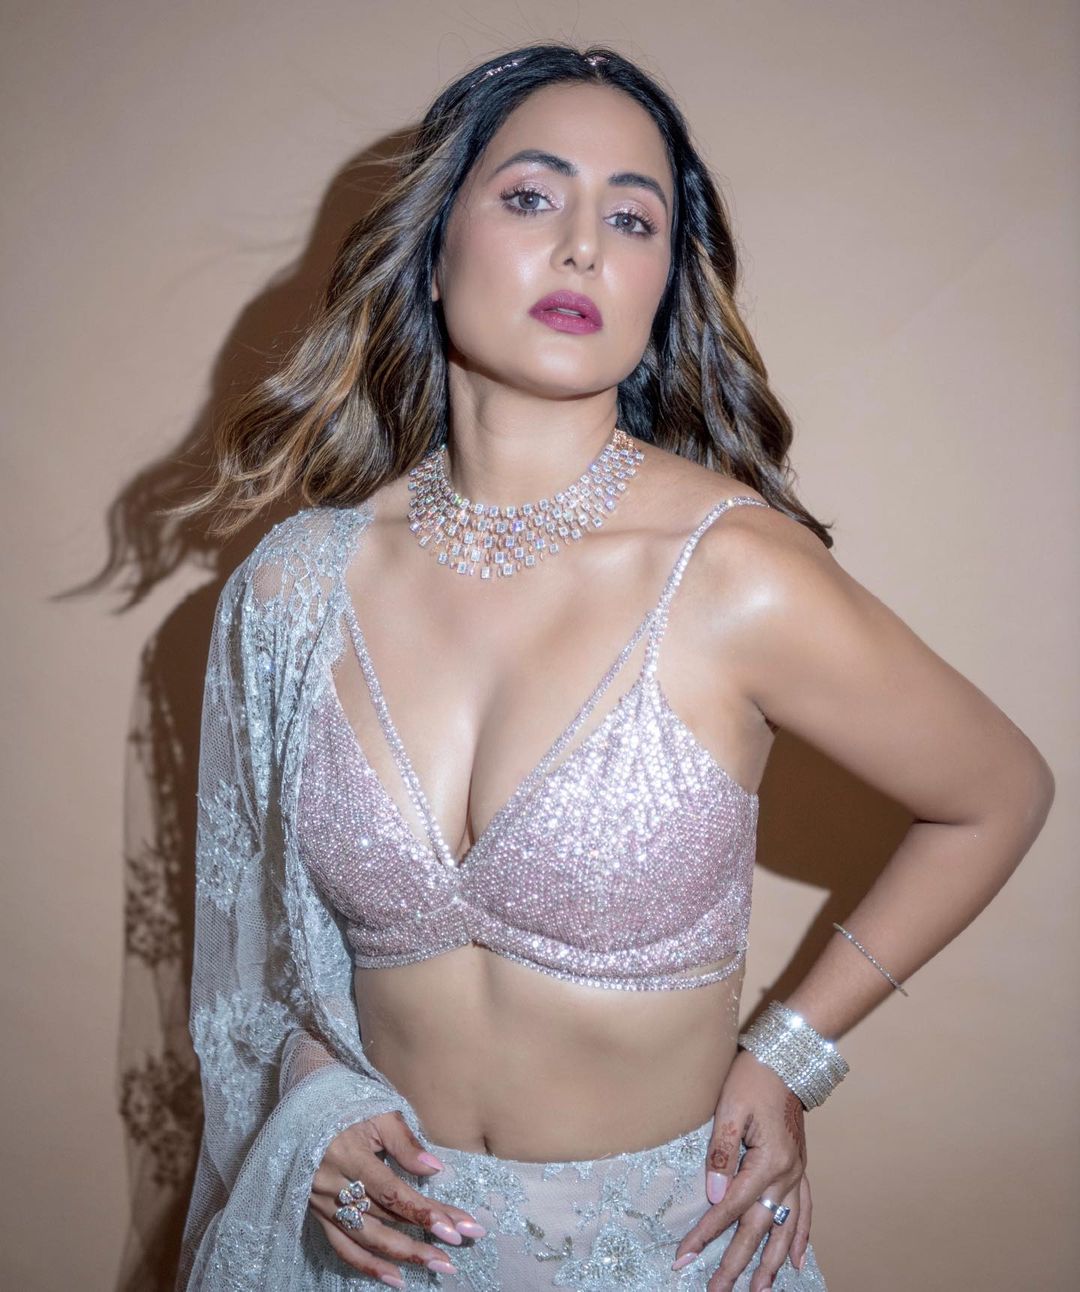 Bollywood Actress Hina Khan Absolutely Killing In Silver Dress Hina Khan Cleavage Pictures Goes 